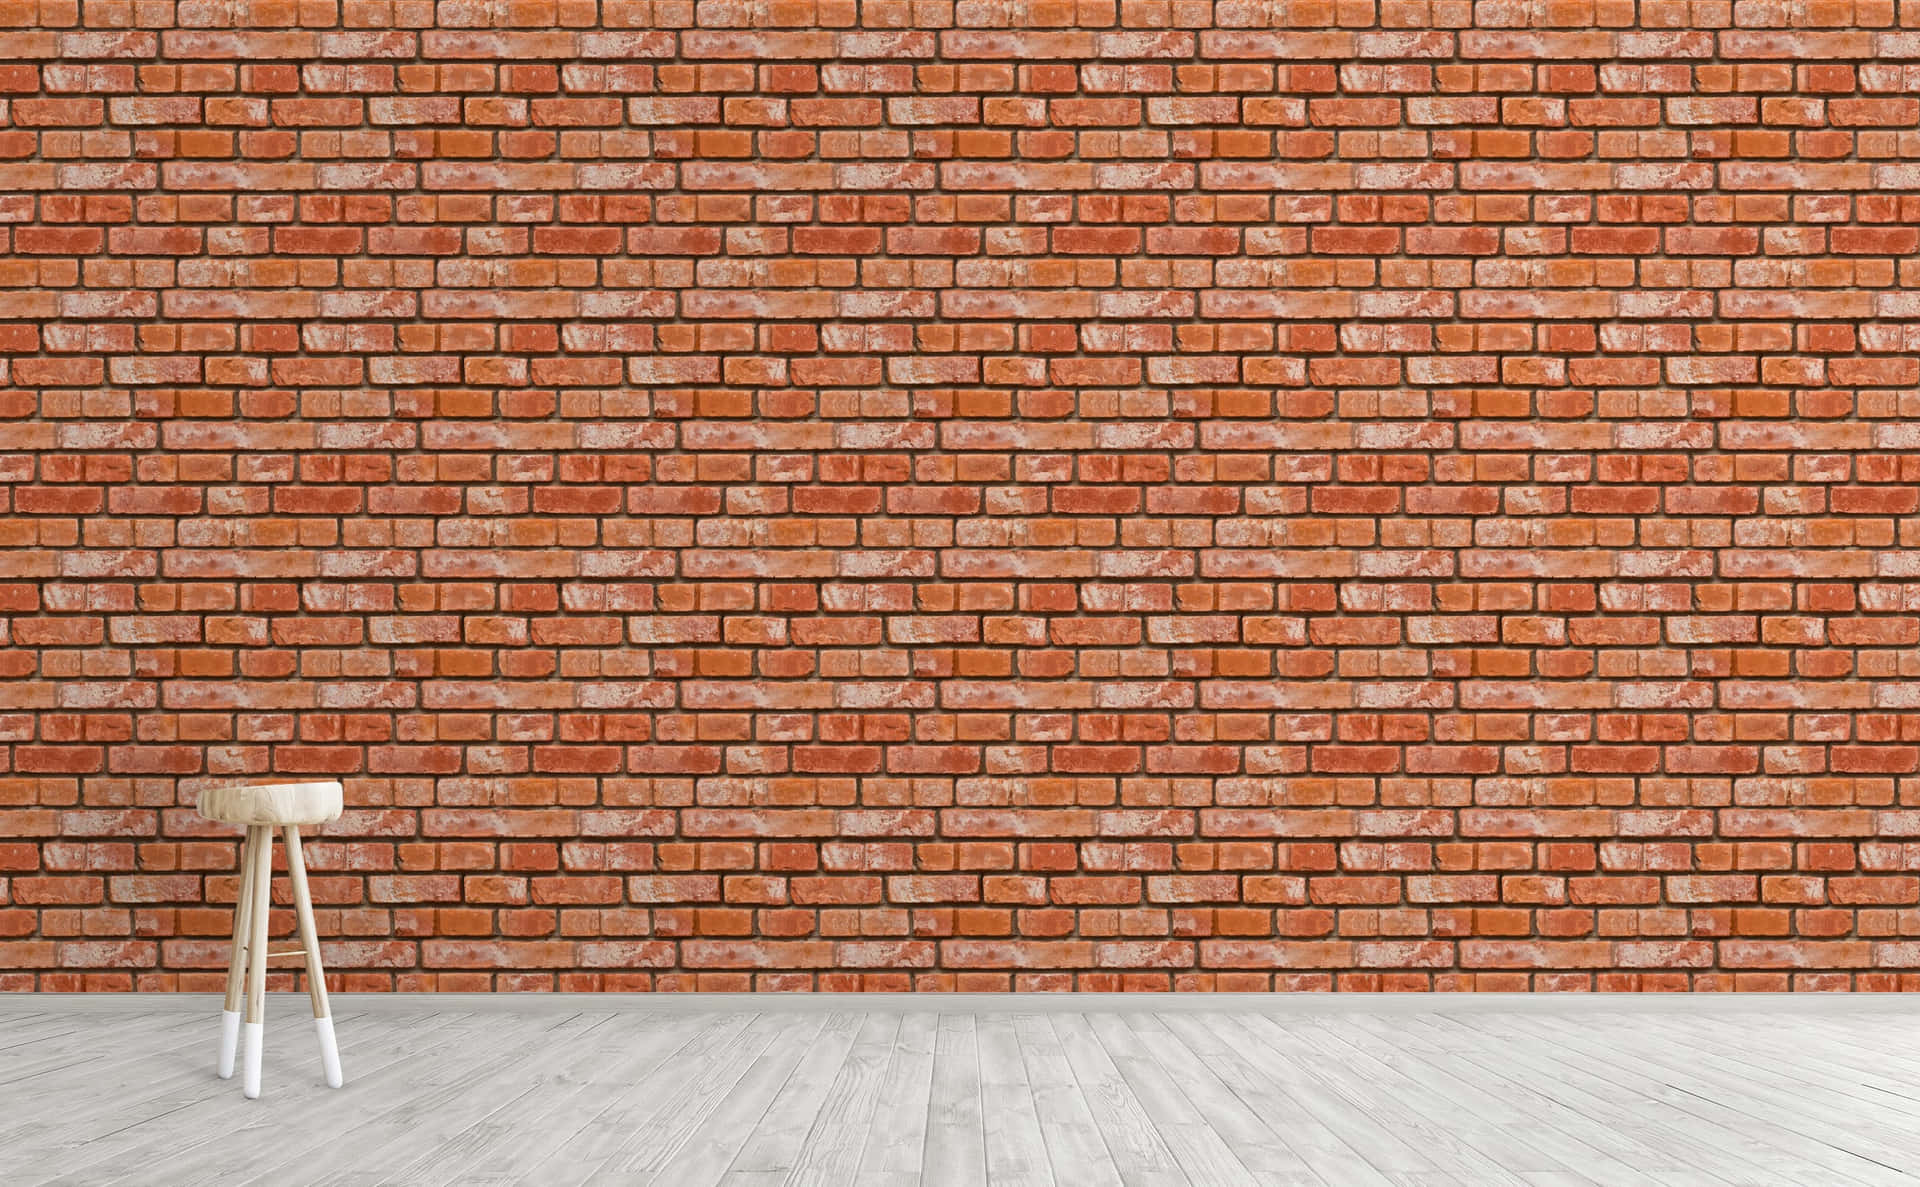 A Brick Wall In An Empty Room